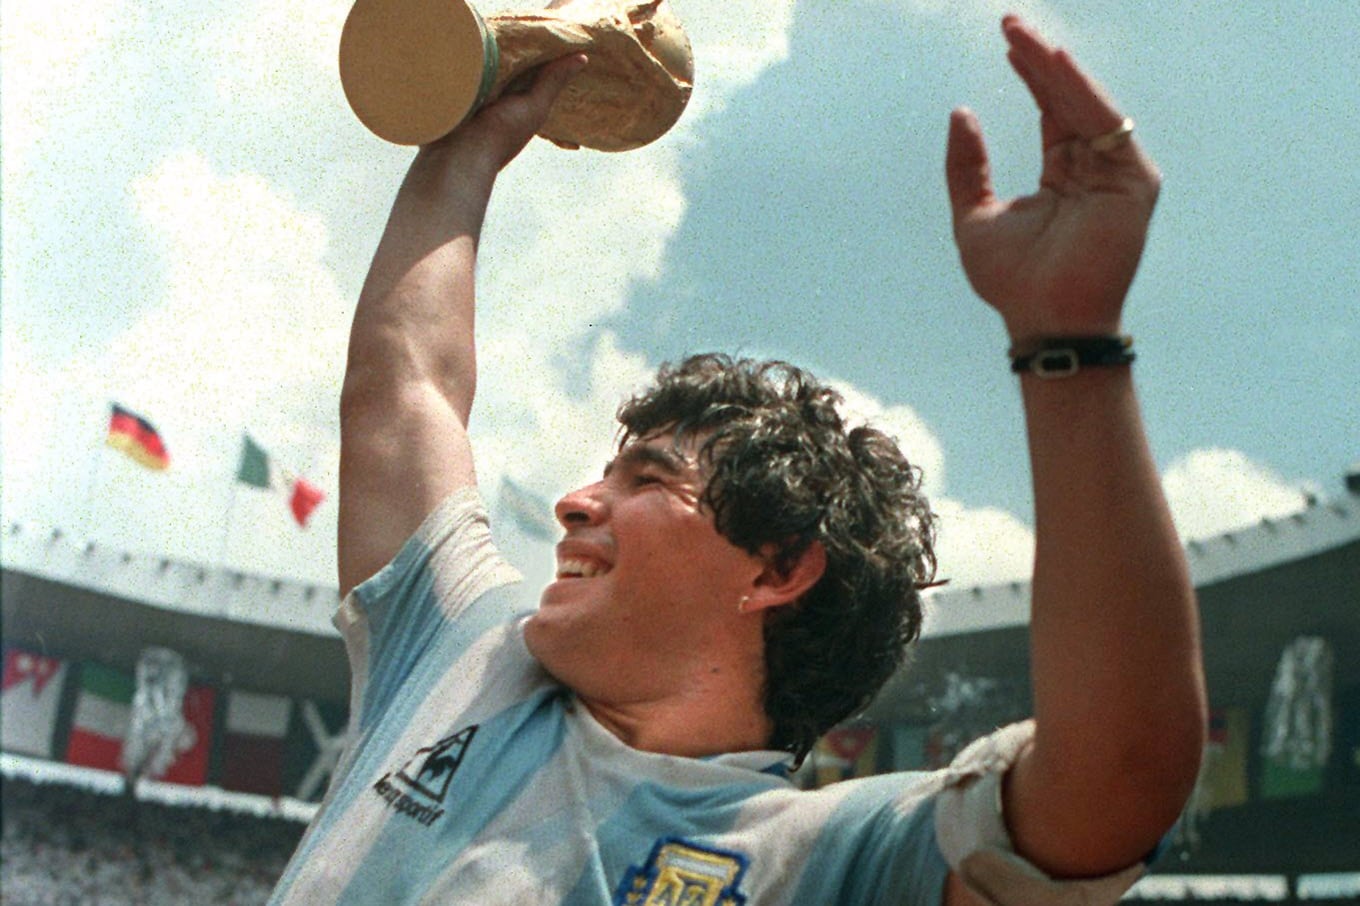 (FILE) Argentina's soccer star team captain Diego Maradona brandishes the World Cup won by his team after a 3-2 victory over West Germany 29 June 1986 at the Azteca stadium in Mexico City. Argentinian football legend Diego Maradona was named coach of the national team on October 28, 2008 in Buenos Aires, according to 1986 World Cup winning coach Carlos Bilardo, after he came out of a meeting with Argentinian Football Association president Julio Grondona.